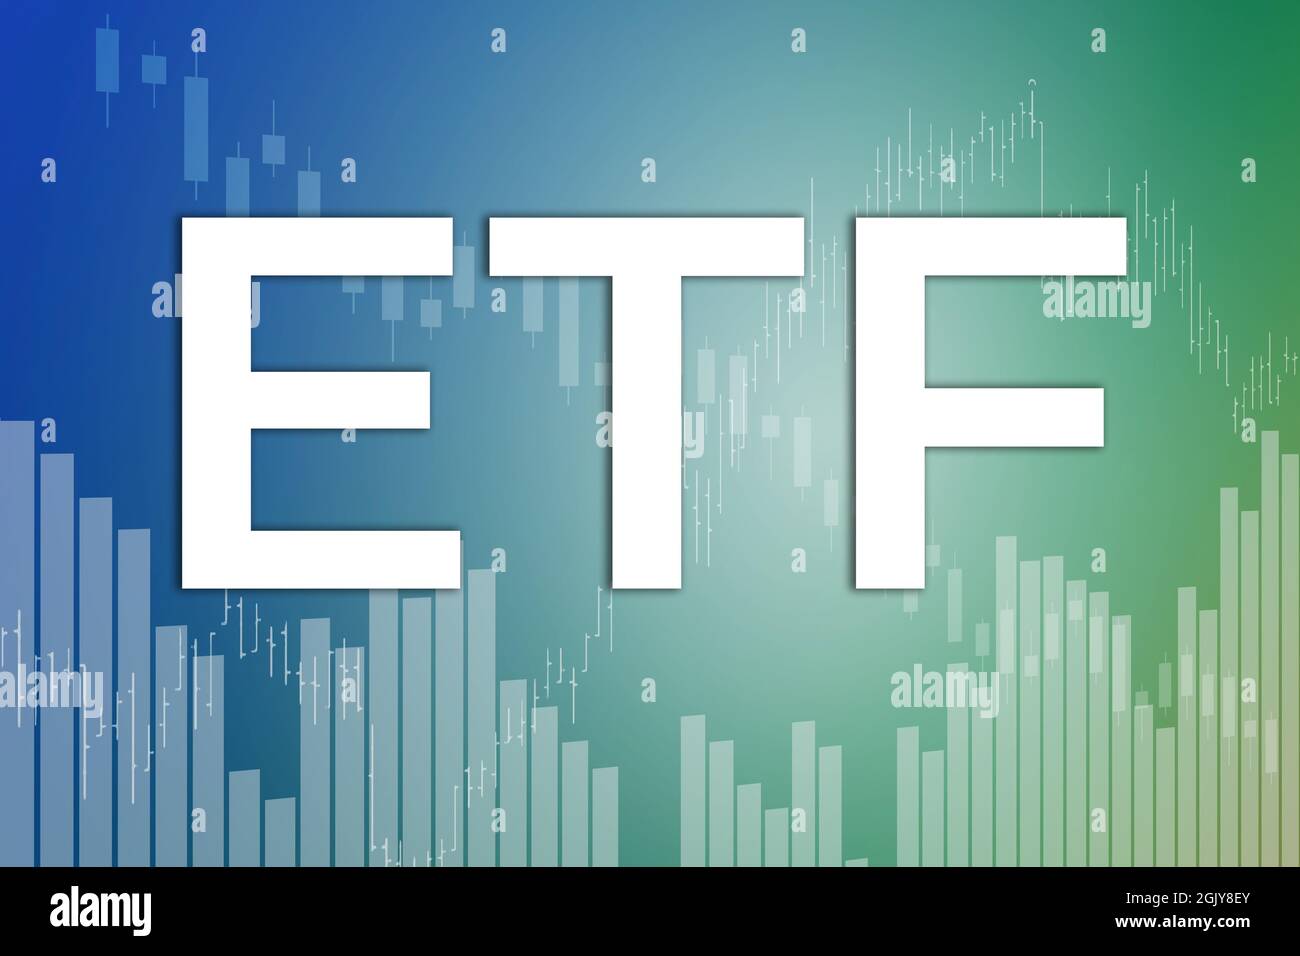 Financial term ETF (Exchange traded fund) on blue and green finance background from graphs, charts, columns, candles, bars, numbers. Trend Up and Down Stock Photo